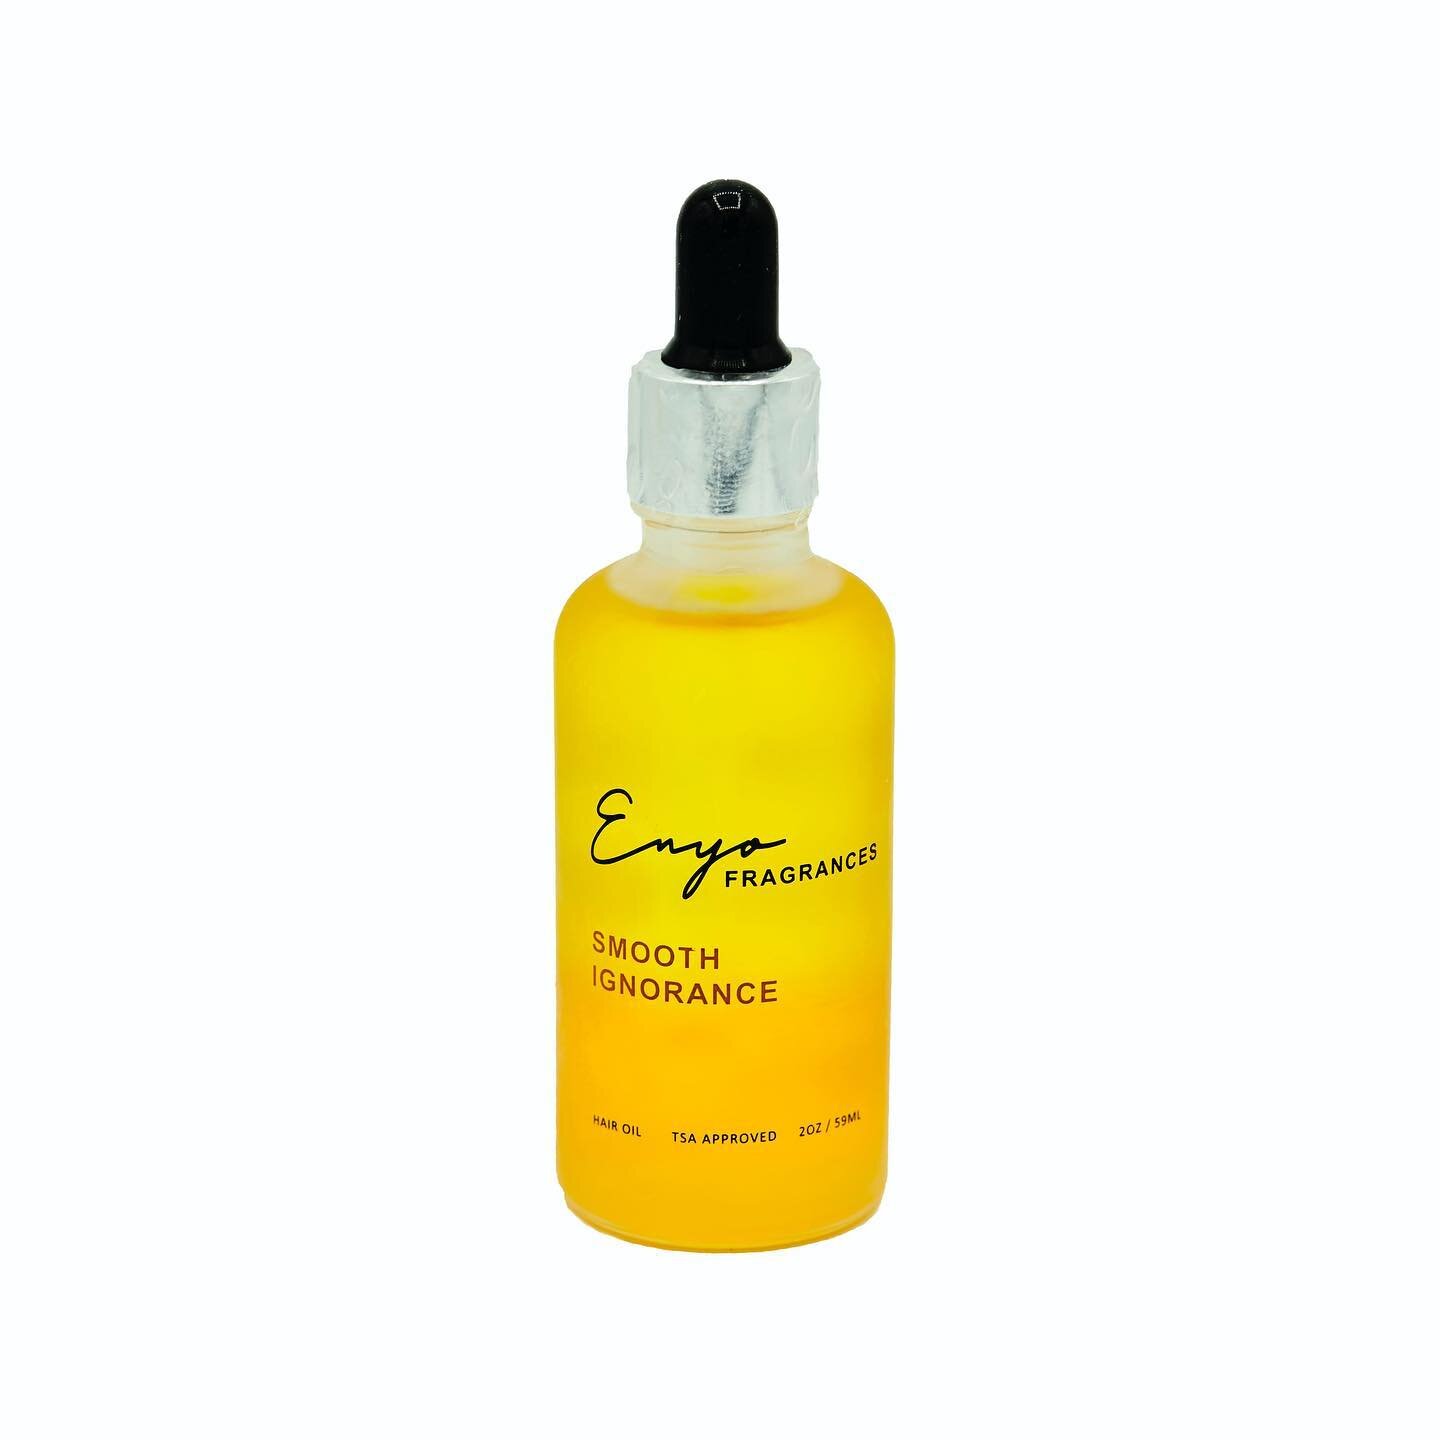 &ldquo;Smooth Ignorance&rdquo; Hair oil by Enyo Fragrances

Our hair oil will encourage a healthy shine, hydrates scalps, helps replace hair follicles, hair growth (beards too) and an ever present warming scent. Enyo Fragrances hair oil, cruelty &amp